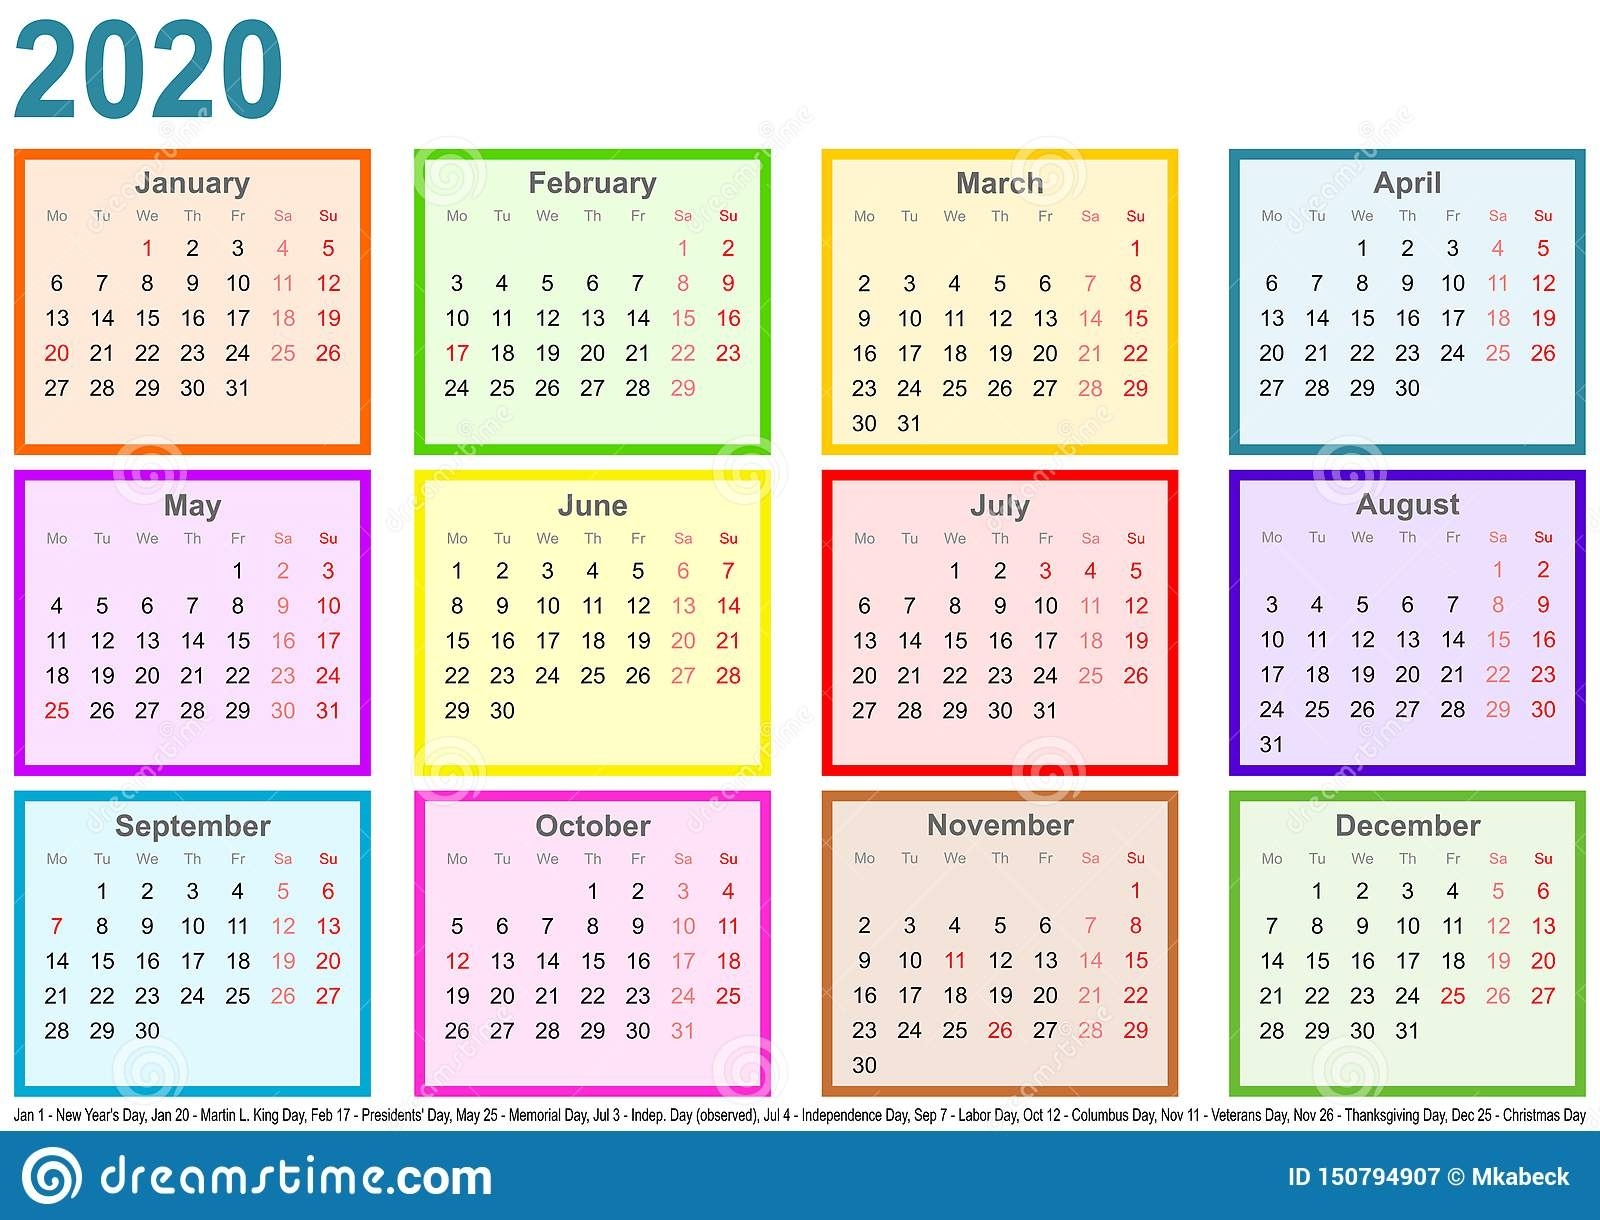 Calendar 2020 Each Month Different Colored Square Usa Stock Impressive Calendar 2020 Printable With Color And Holidays Usa